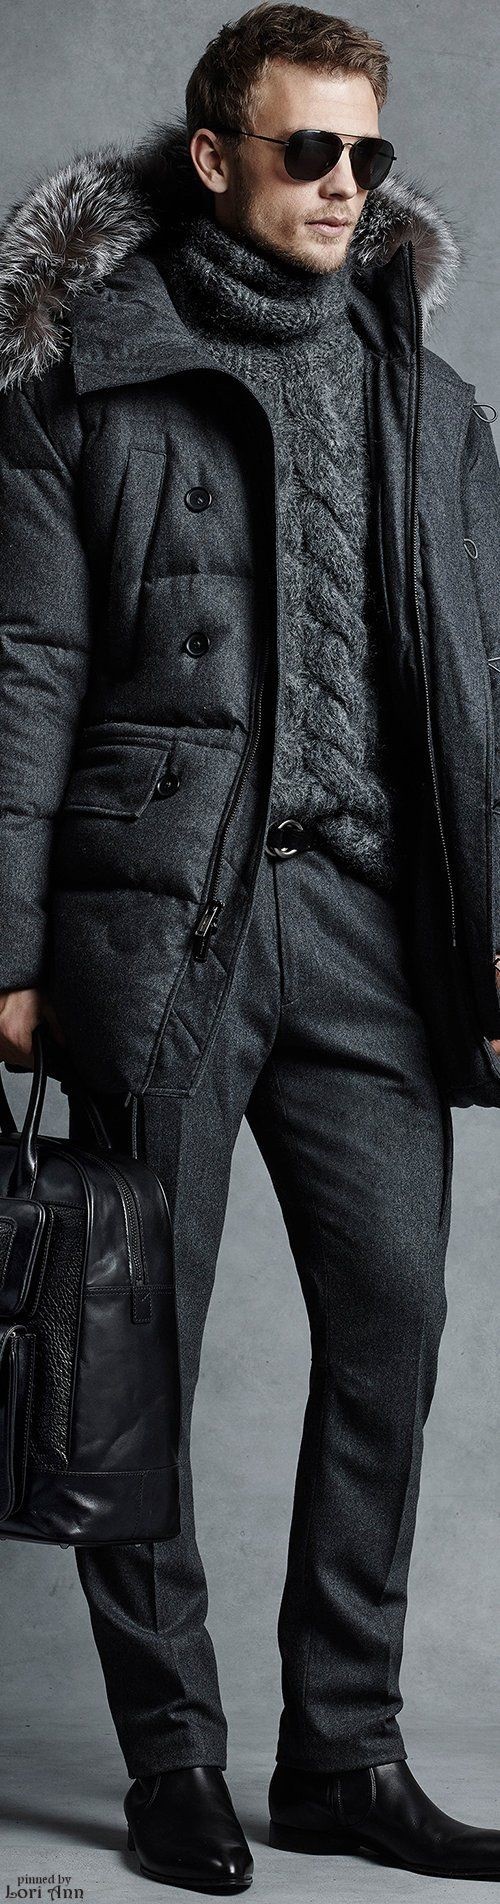 men's charcoal gray monochromatic outfit